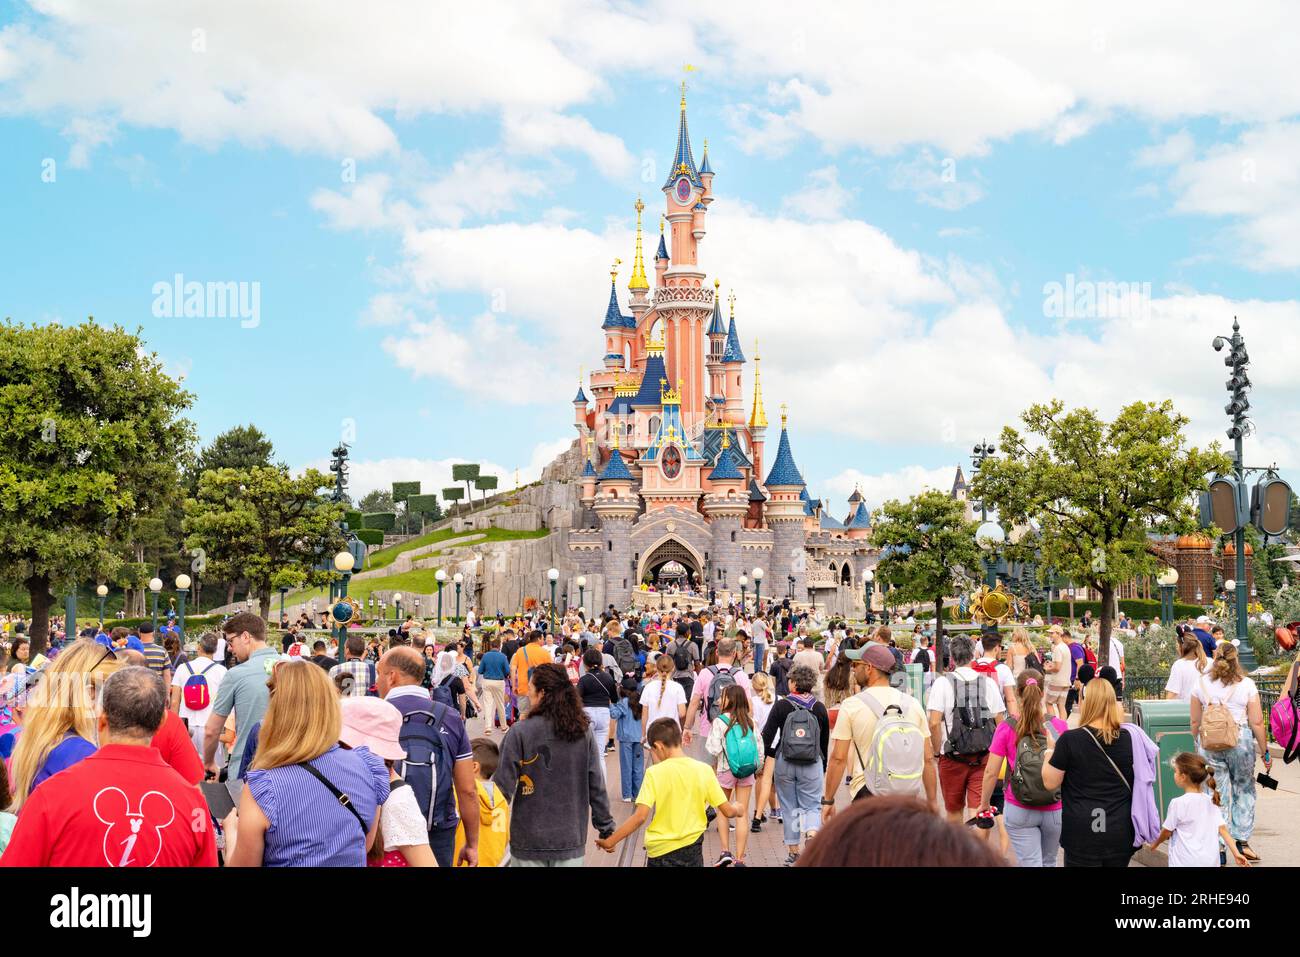 Visitors in front of the Disneyland Paris Castle, disneyland Main Street, Disneyland Paris France Europe Stock Photo